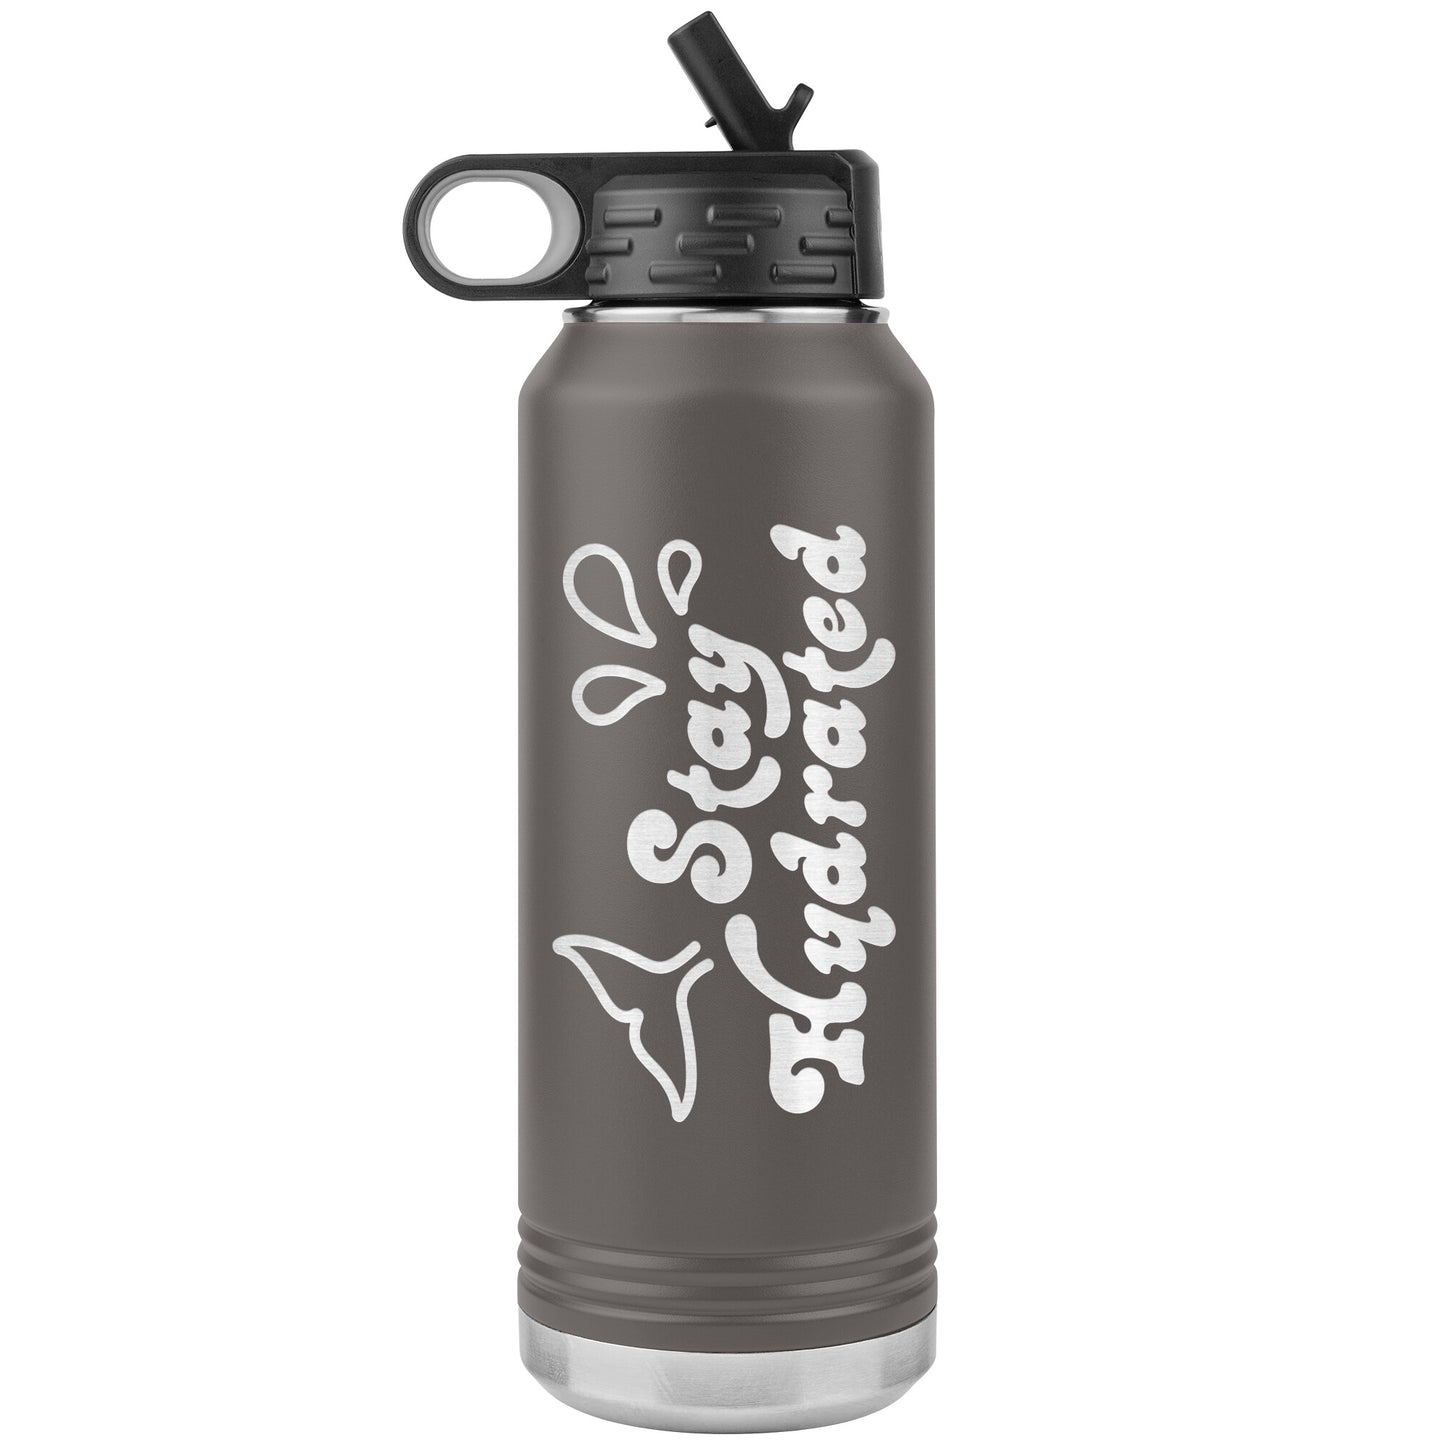 Stay Hydrated 02 - 32oz Insulated Water Bottle